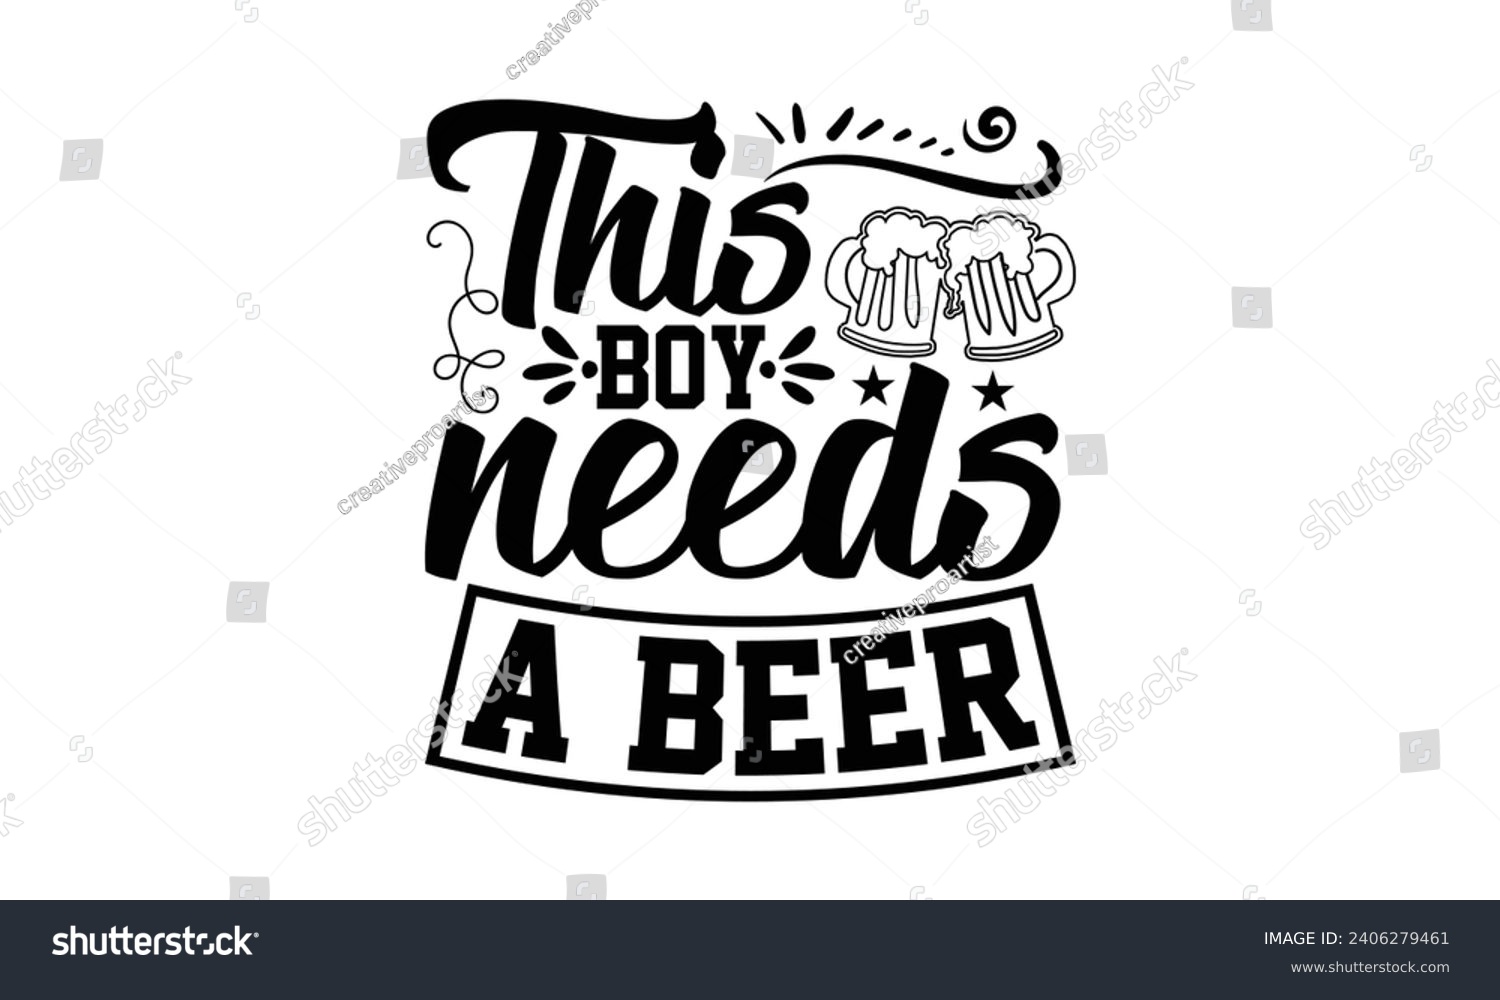 SVG of This Boy Needs A Beer- Beer t- shirt design, Handmade calligraphy vector illustration for Cutting Machine, Silhouette Cameo, Cricut, Vector illustration Template. svg